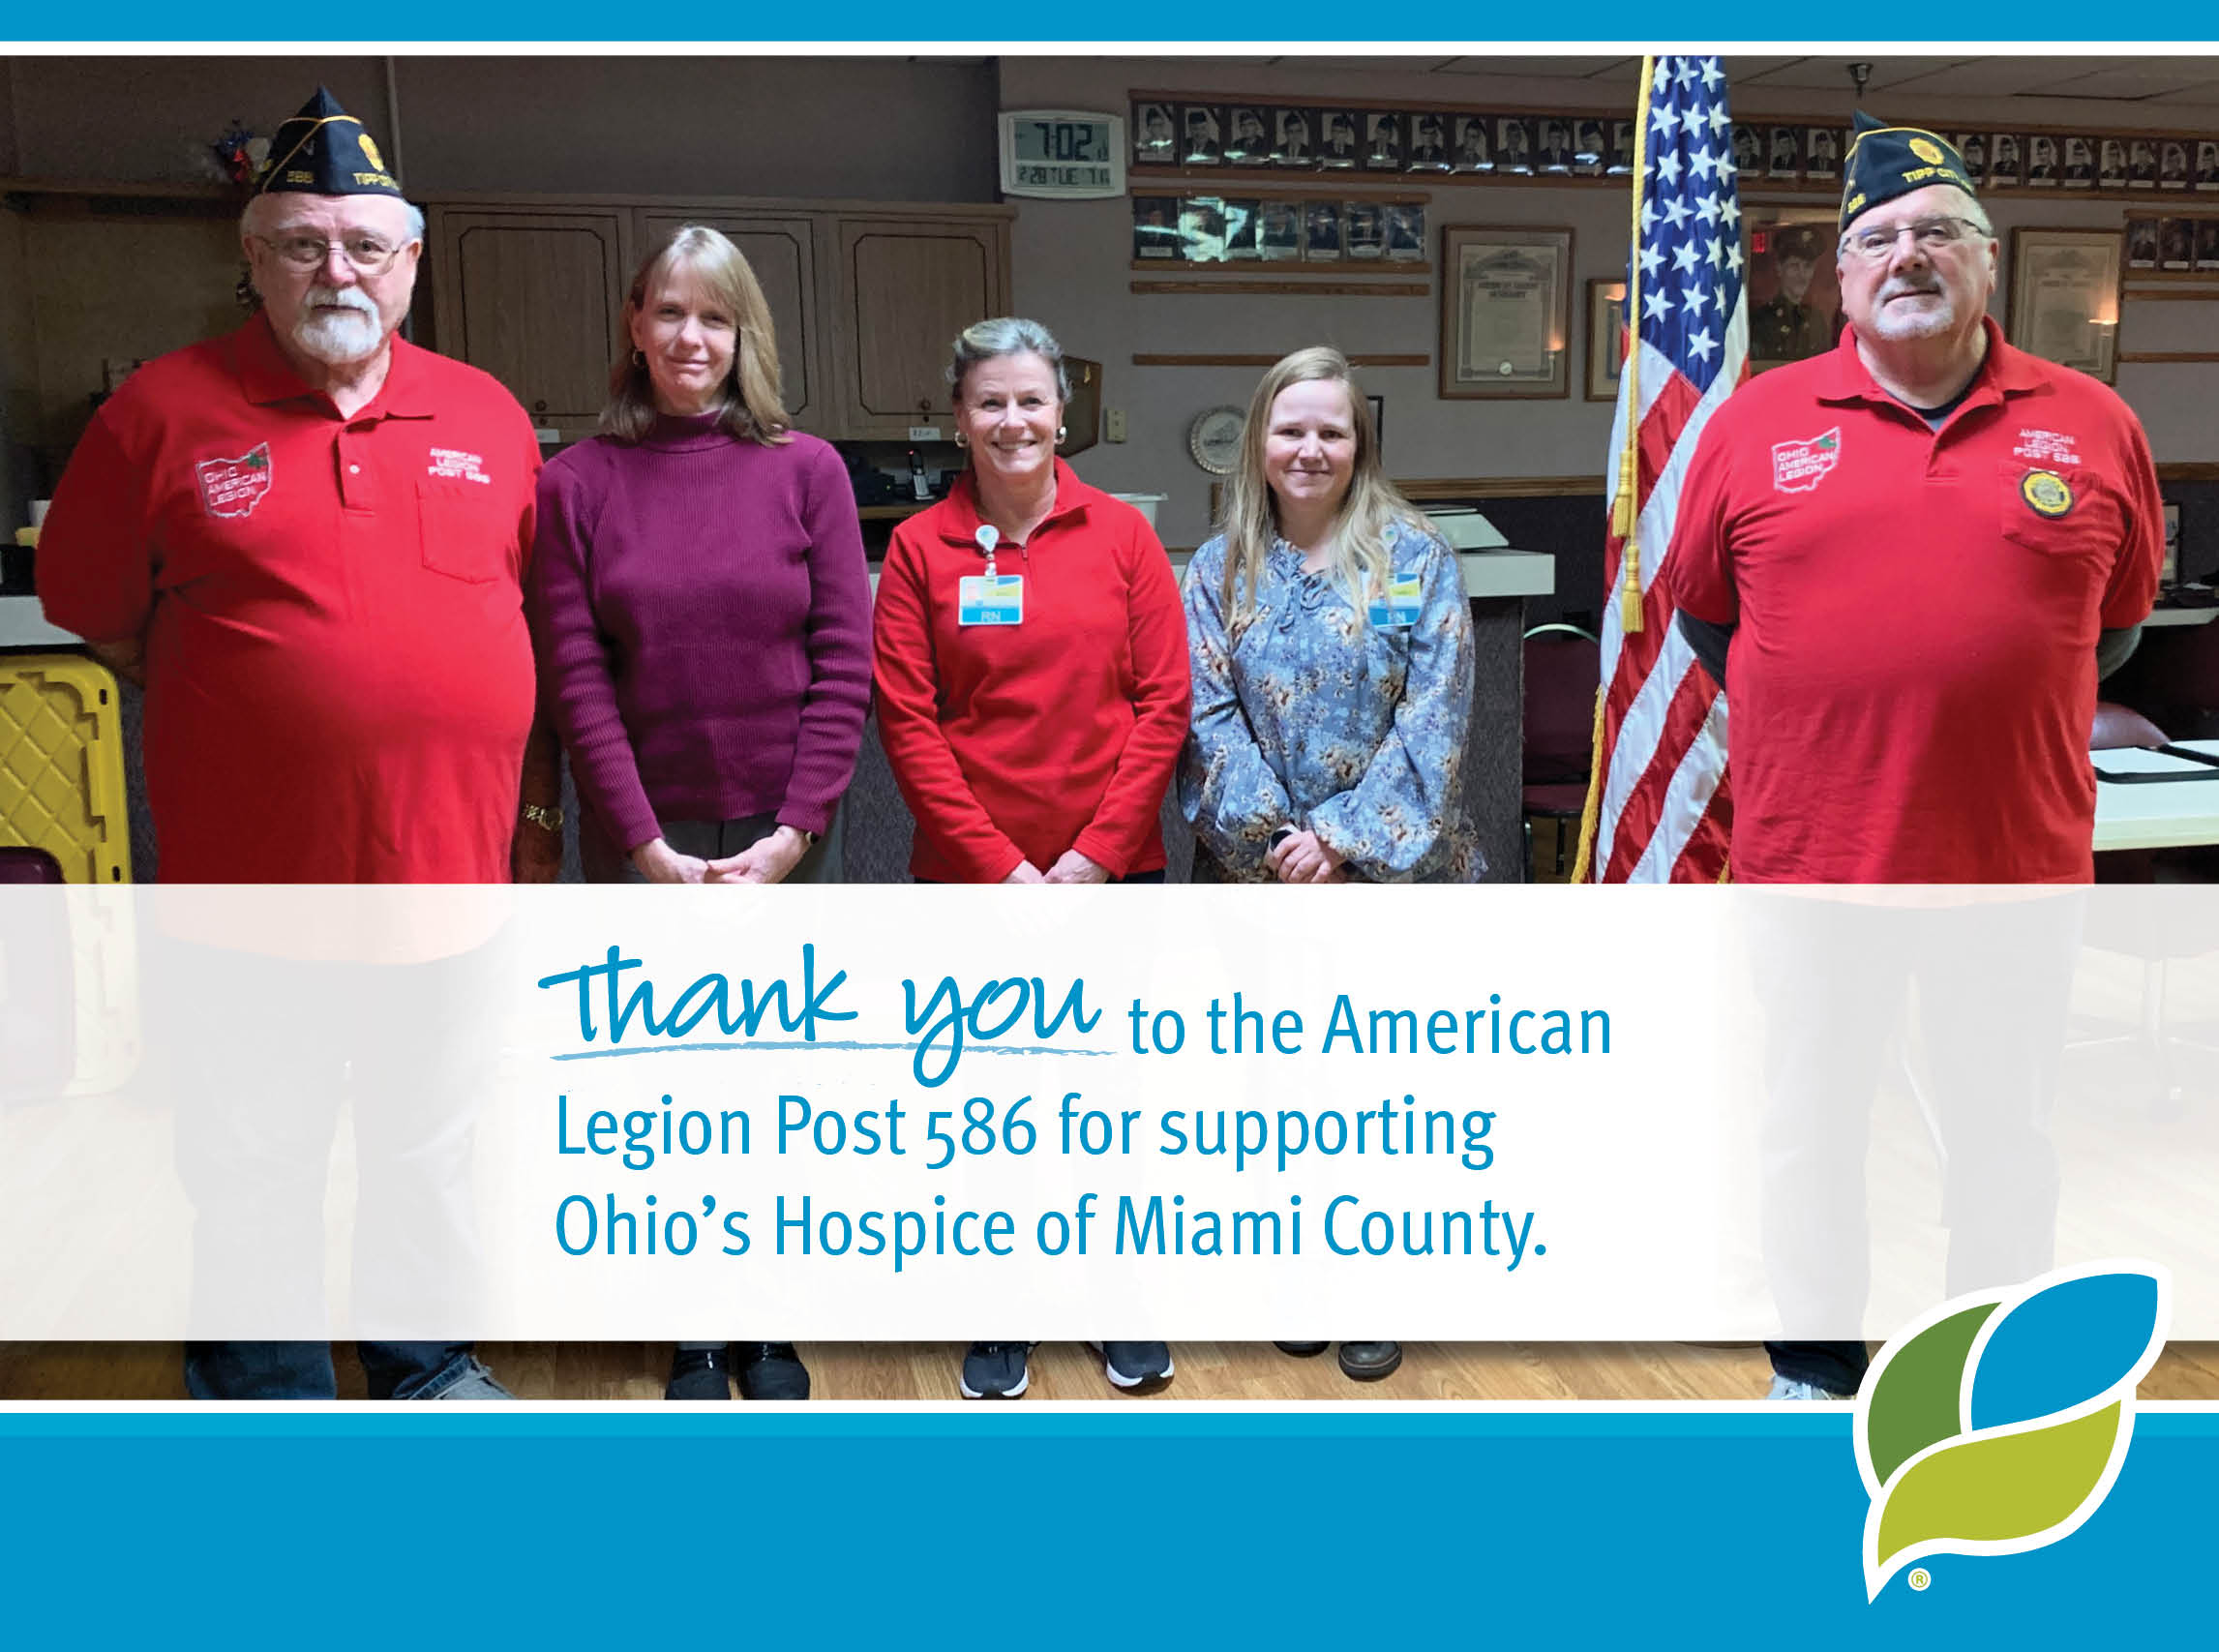 Thank you to the American Legion Post 586 for supporting Ohio's Hospice of Miami County